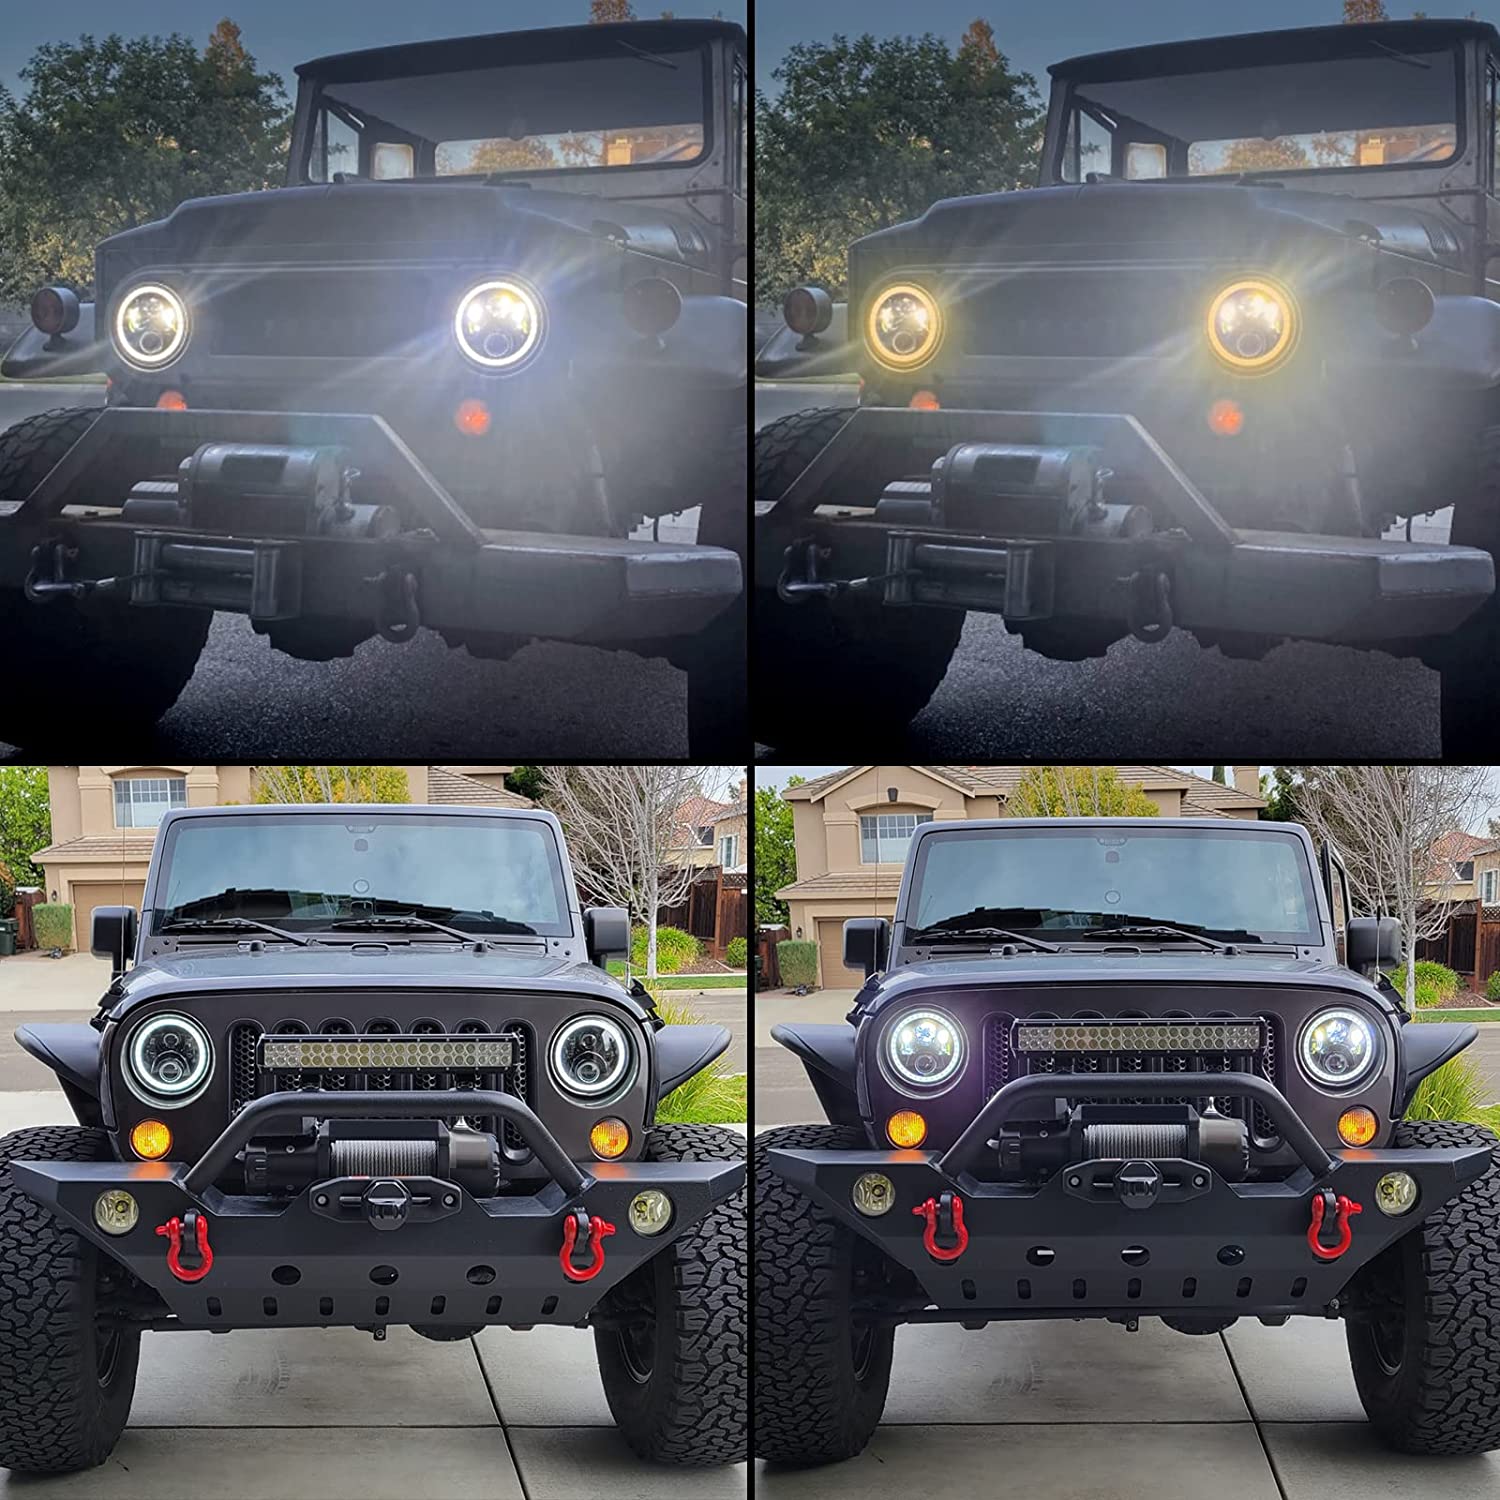 Haitzu 7 inch Led Round Black Hi/lo Sealed Beam headlight DOT Approved  Compatible with Jeep Wrangler JK Hummer H1 H2 ,Halo with Amber Turn Light & 